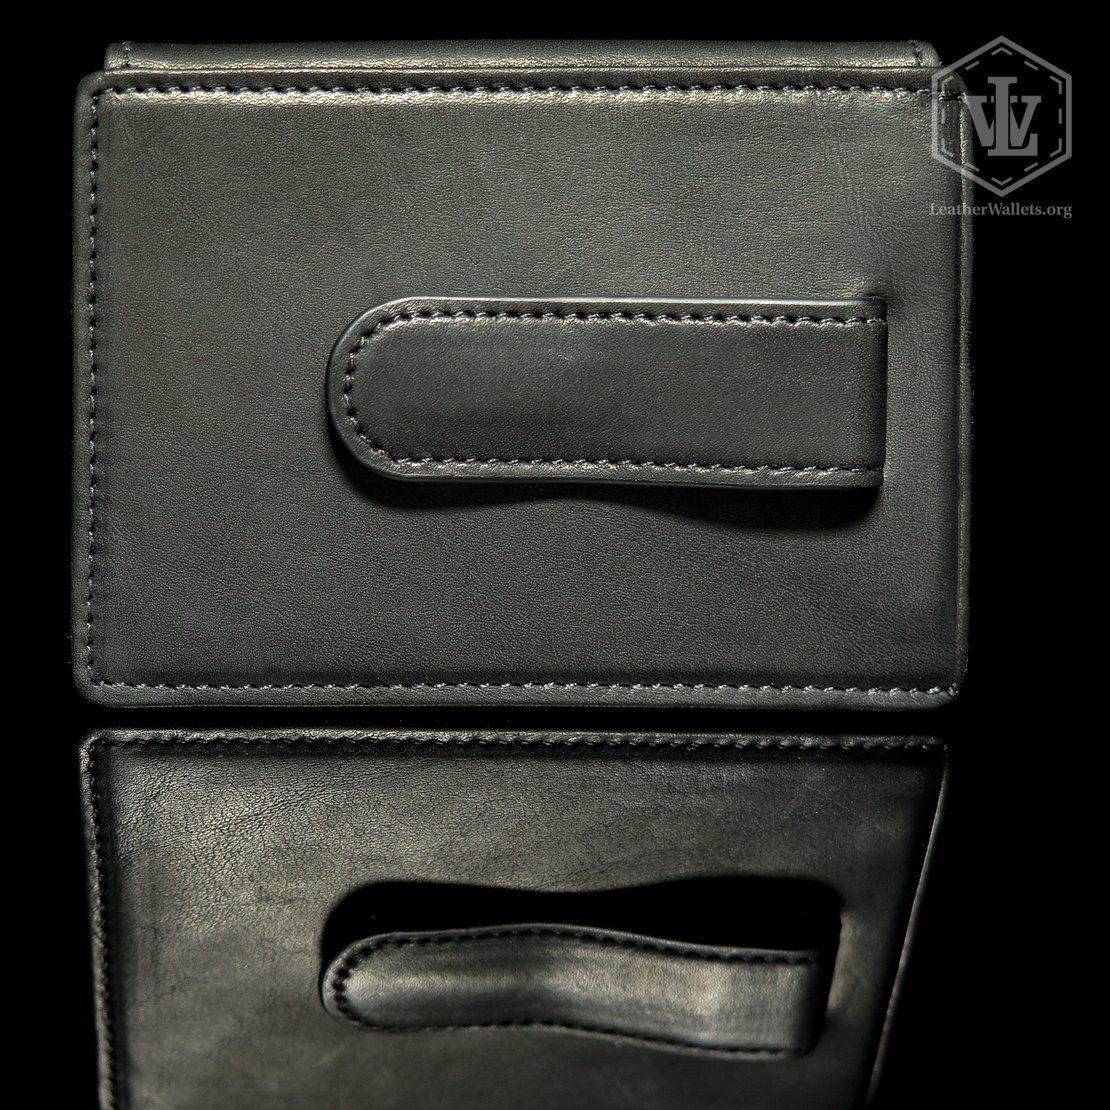 A review of the Leatherology Money Clip Cardholder | LeatherWallets.org